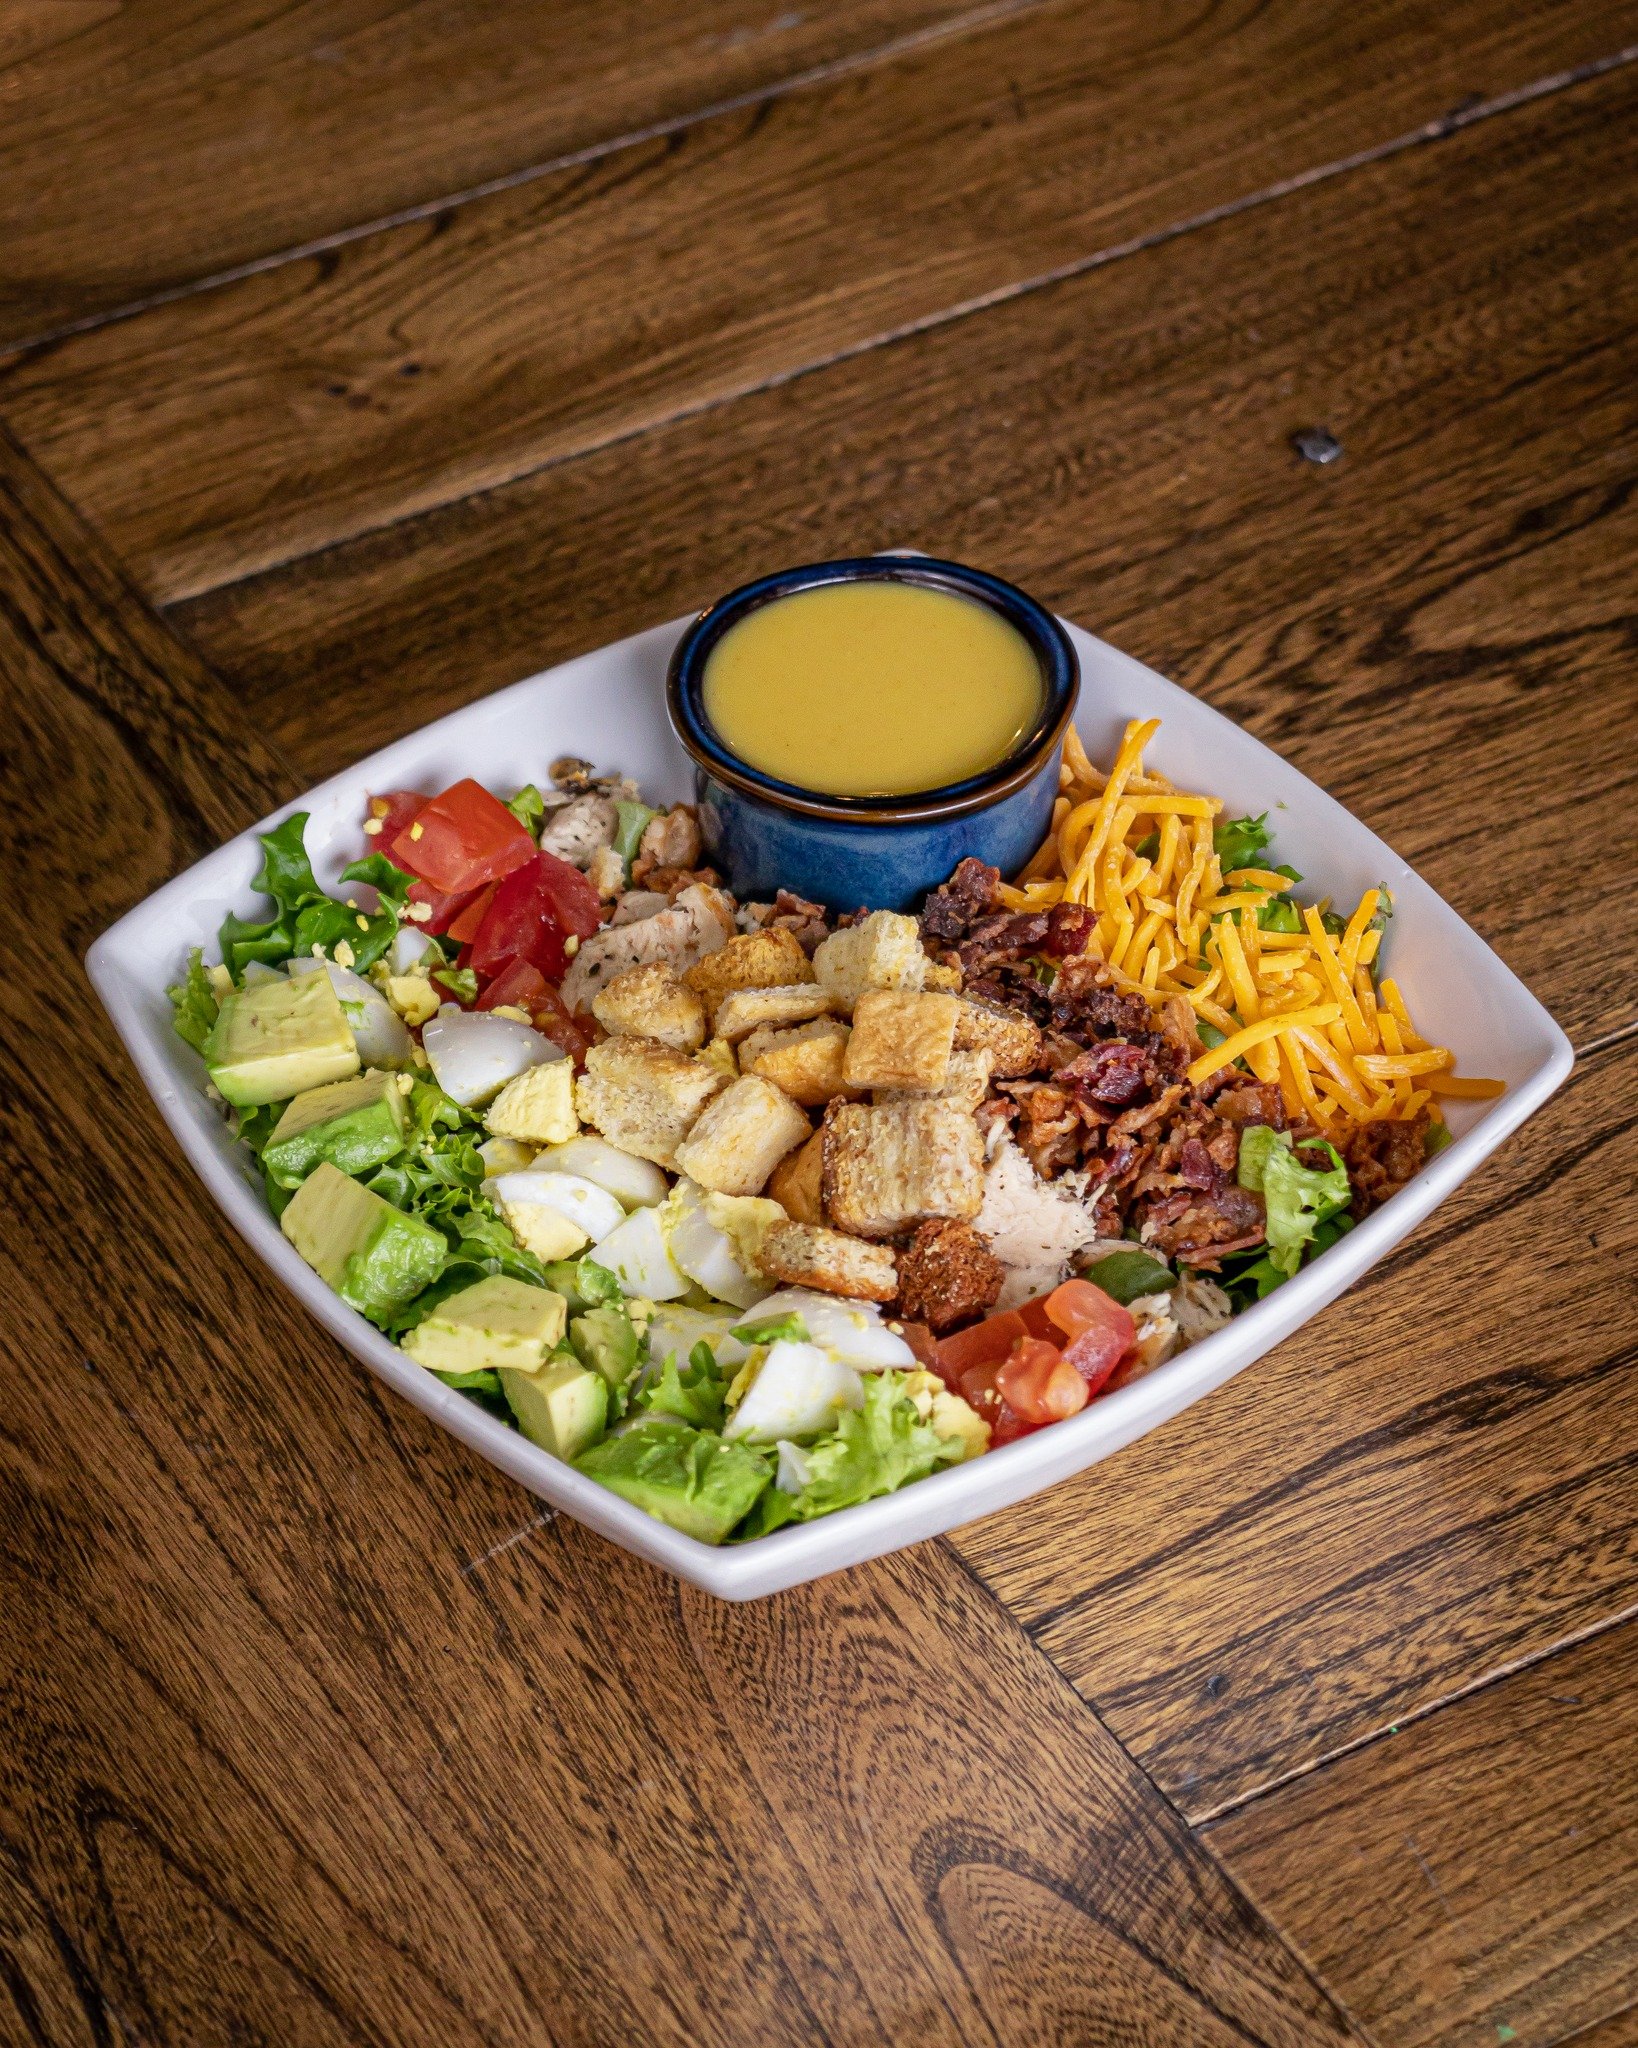 A classic Cobb Salad - what could be better? 🥗

While our featured menu is always evolving with new and delicious options, we have multiple items that stick around; one of them being our Cobb Salad. Made up of mixed greens, chicken, bacon, cheddar, 